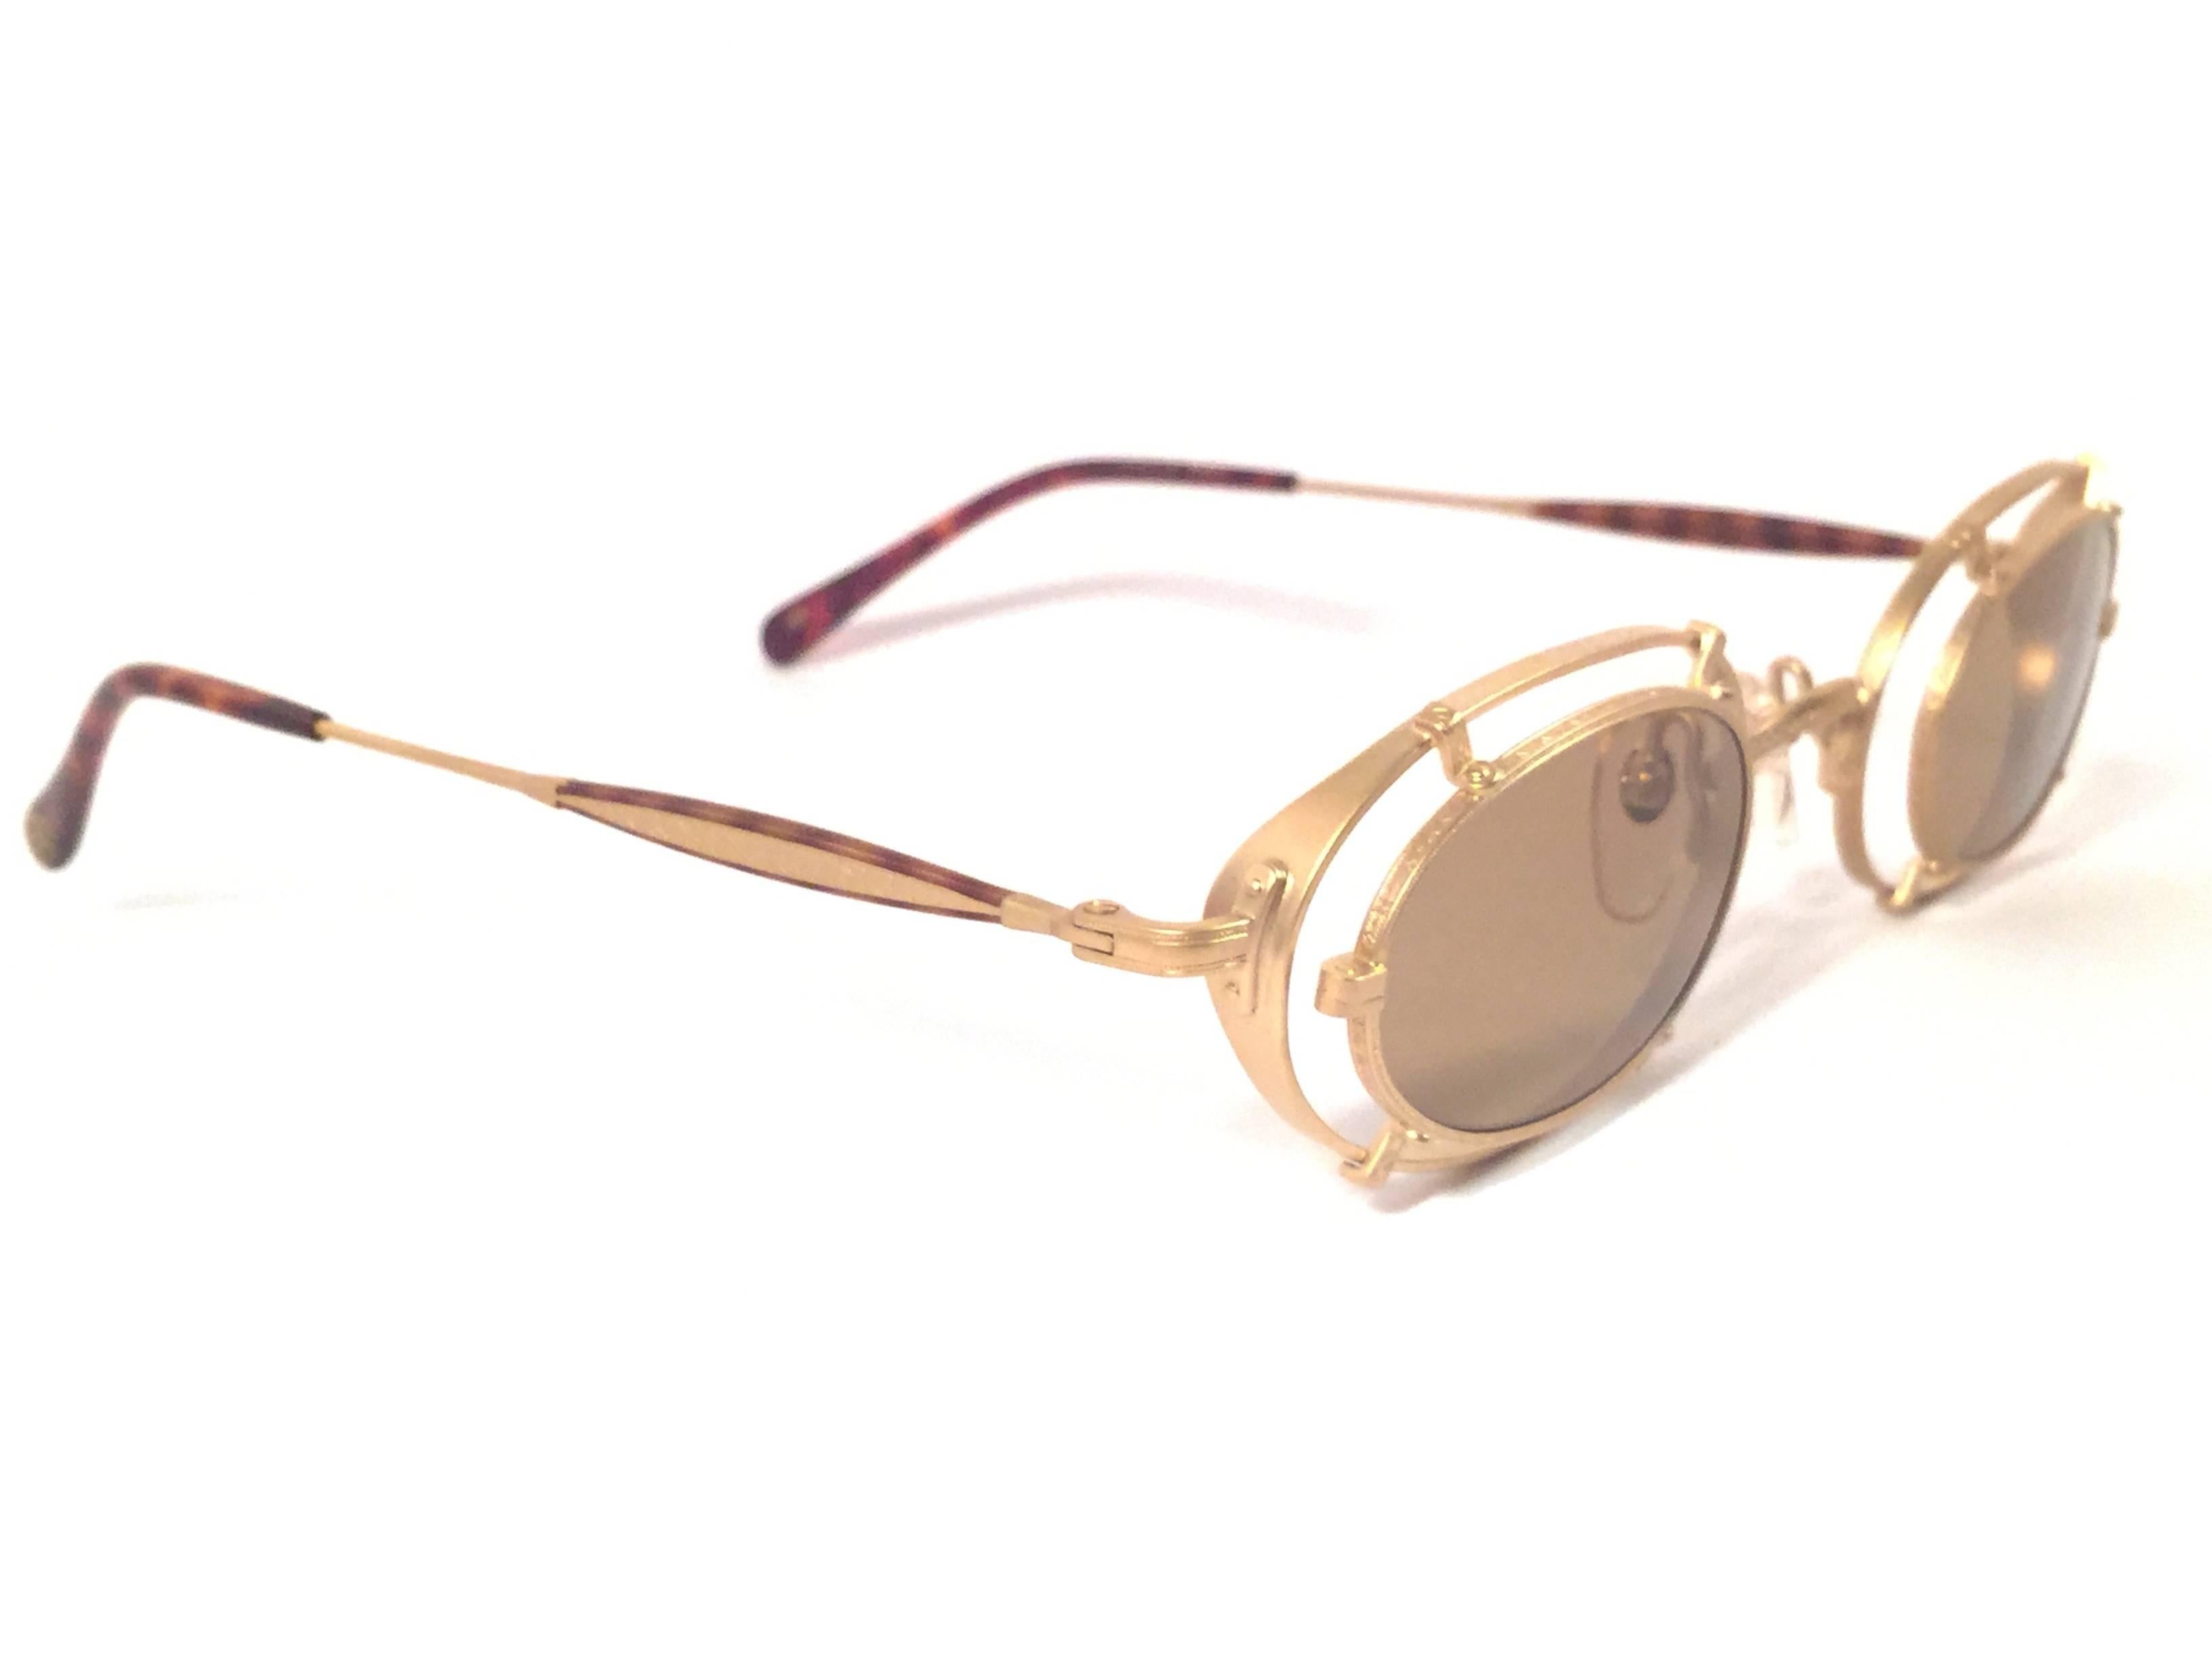 Cult brand Matsuda signed this ultra chic pair of oval with spider like ornaments in gold matte sunglasses. 

Spotless medium brown lenses.

Superior quality and design. 

New, never worn or displayed. Made in japan.

MEASUREMENTS 

FRONT : 13.5 CMS